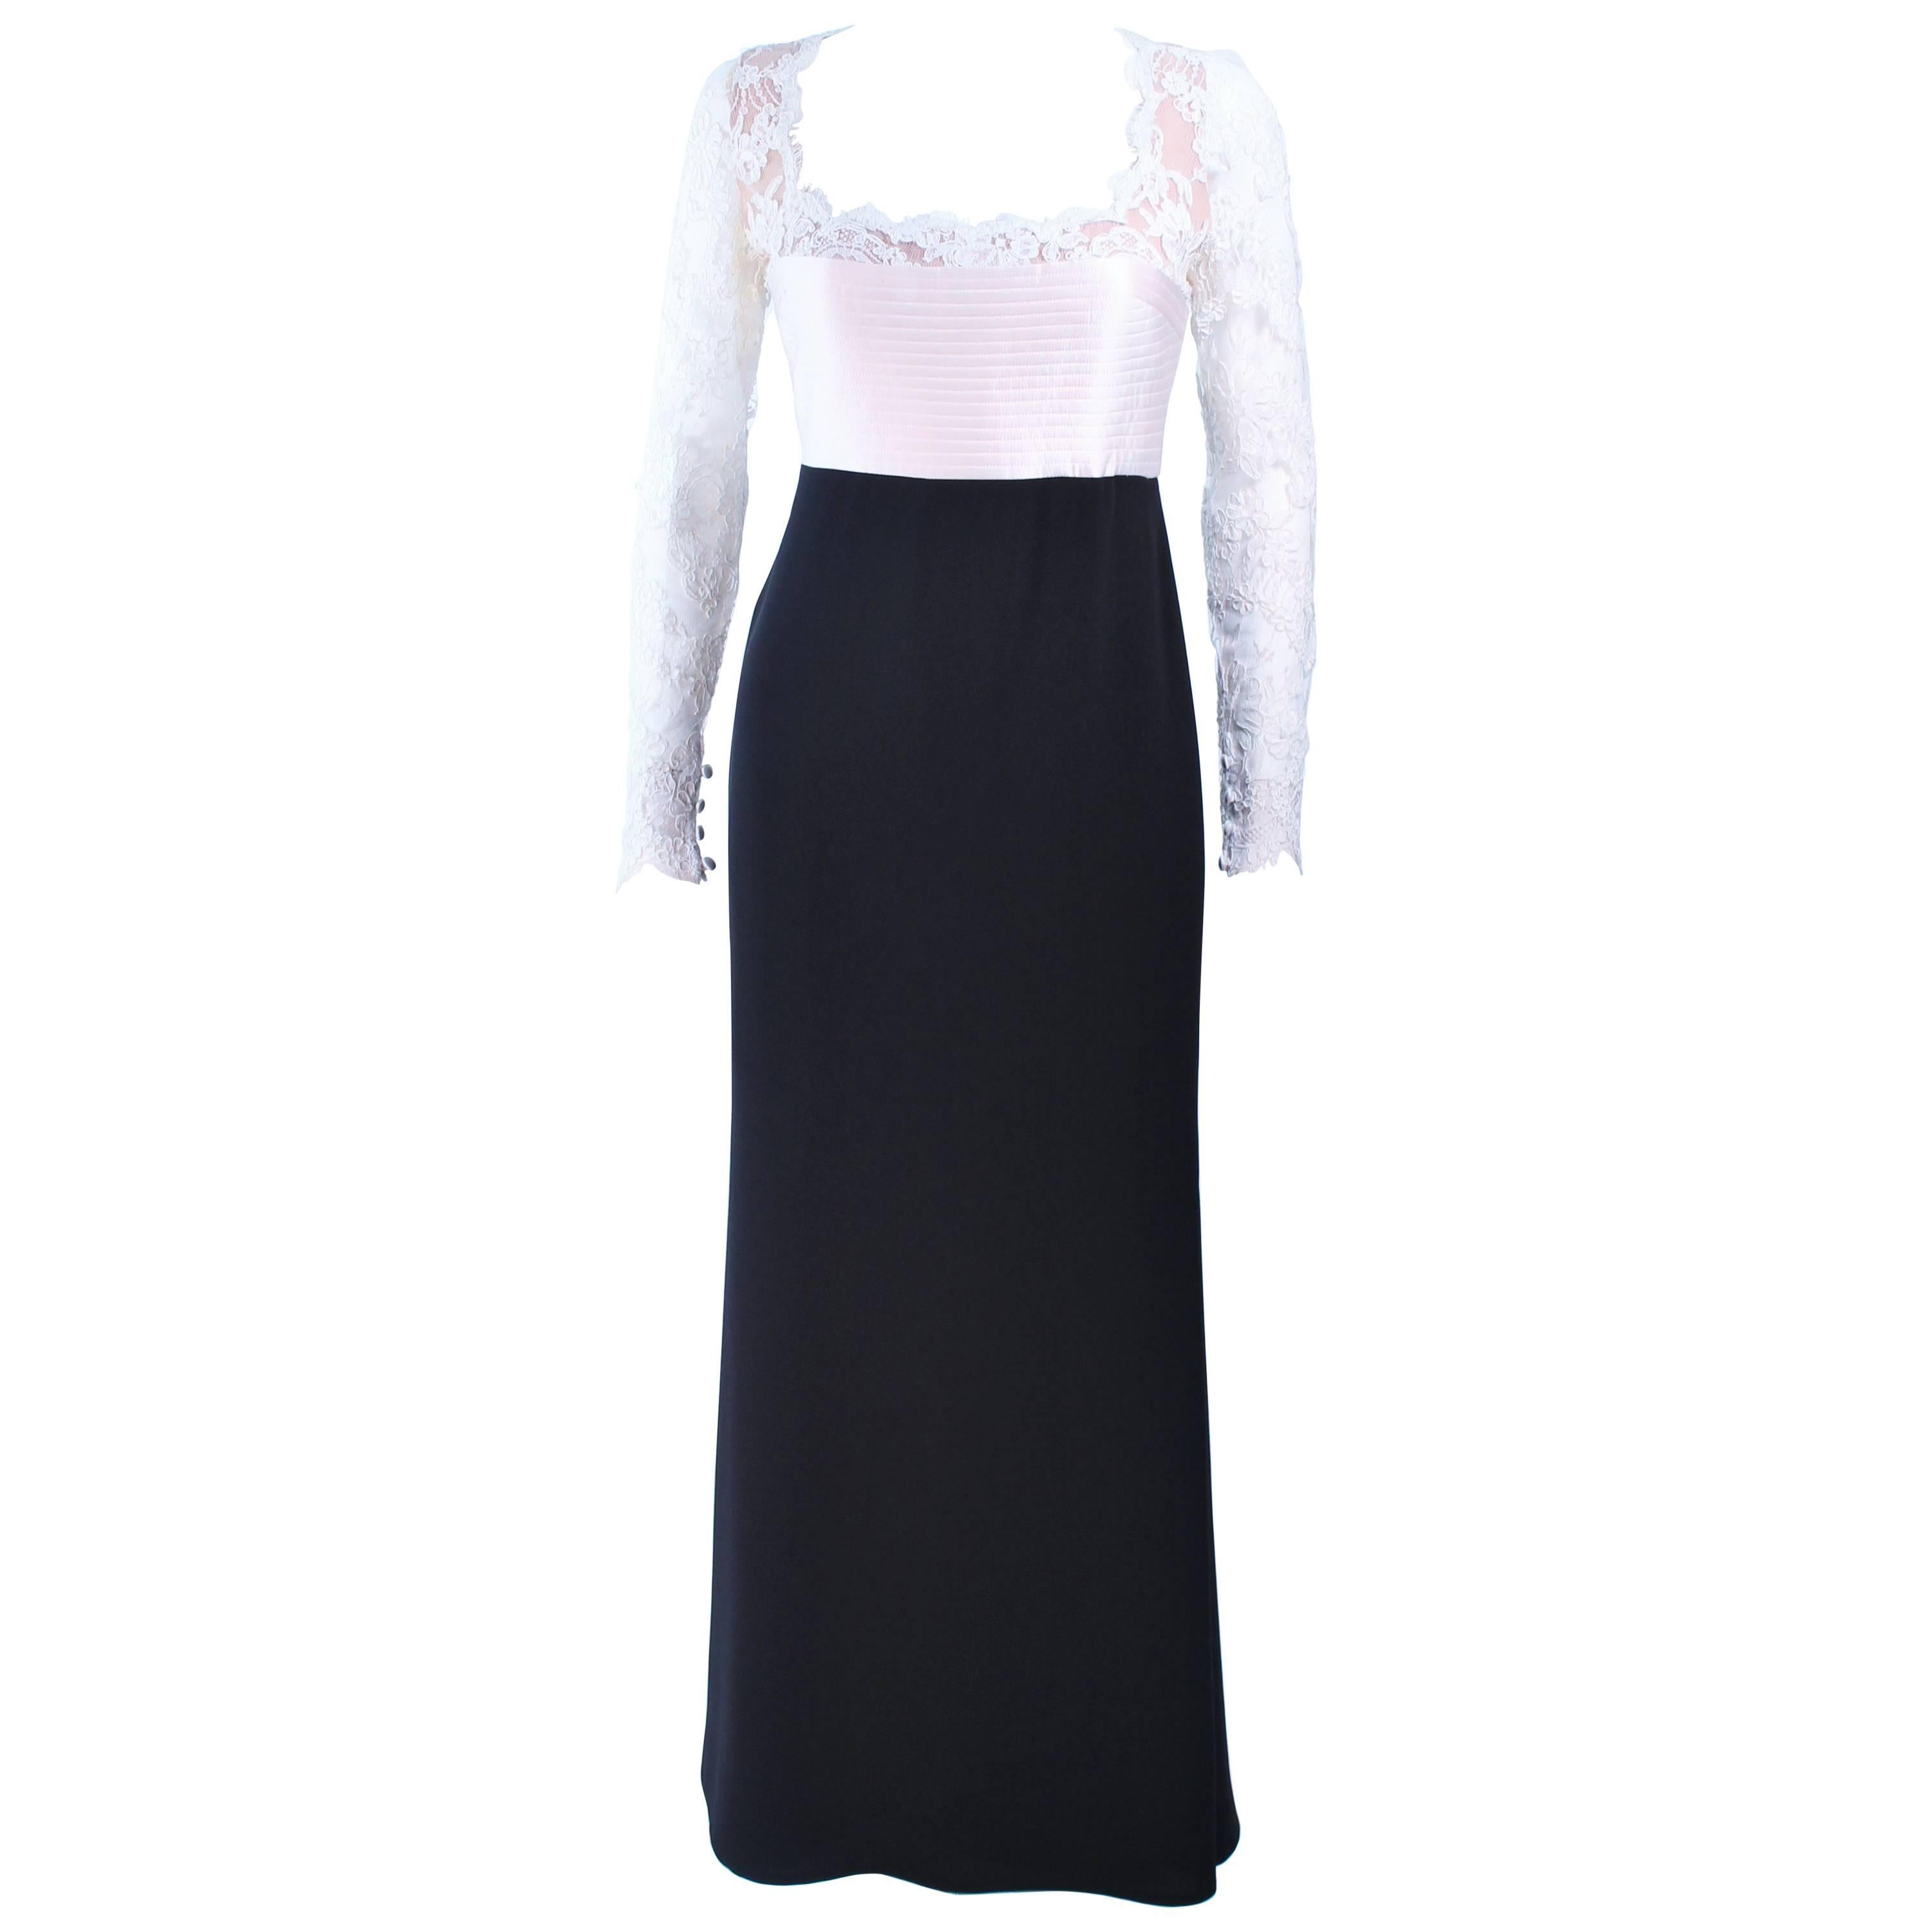 BADGLEY MISCHKA Black and White Lace Gown Size 8 10